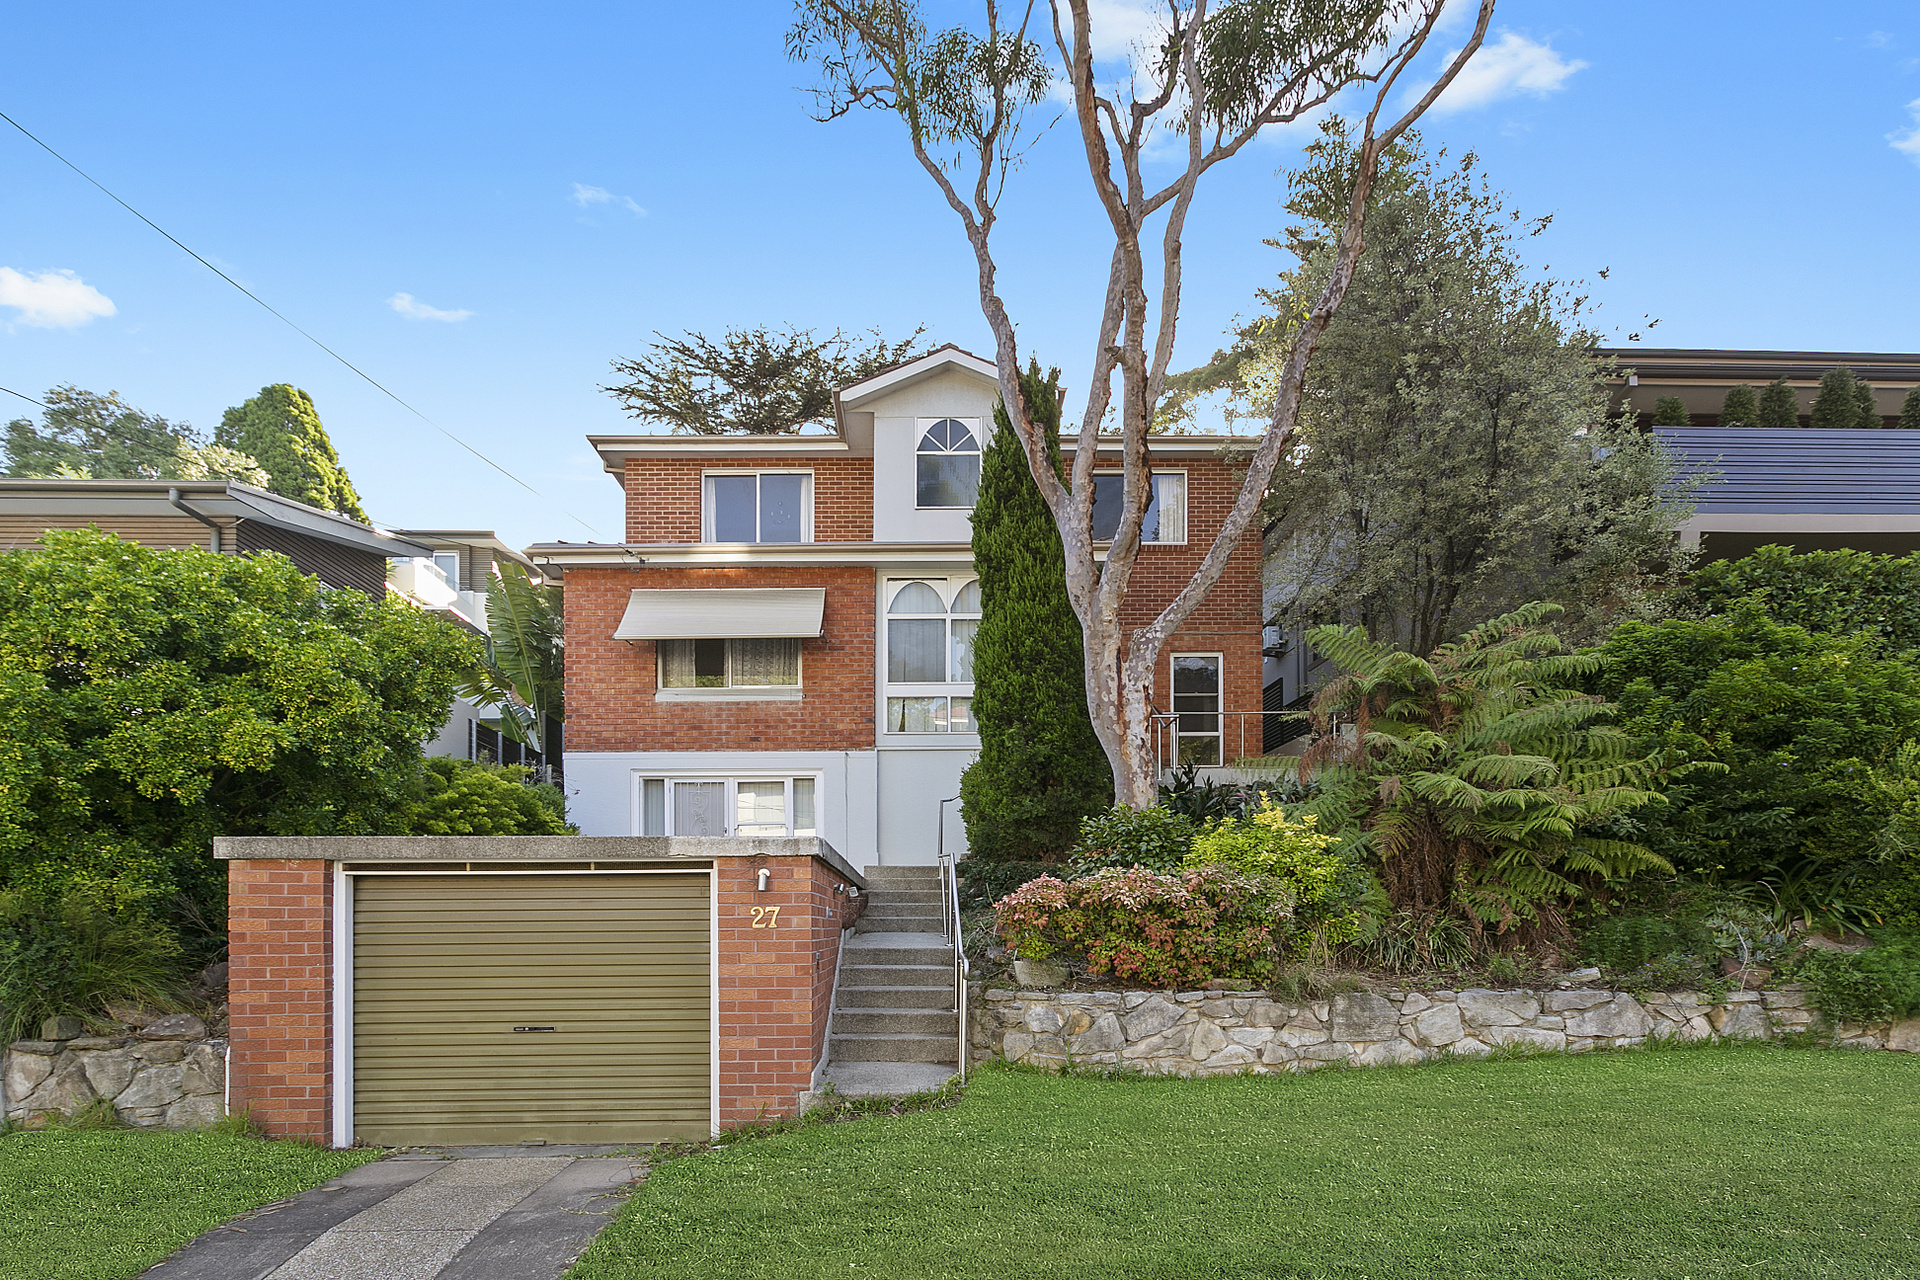 On Saturday 16th March 2019, 27 Pauling Avenue in Coogee sold for $2,335,000 - $535,000 over the reserve price.